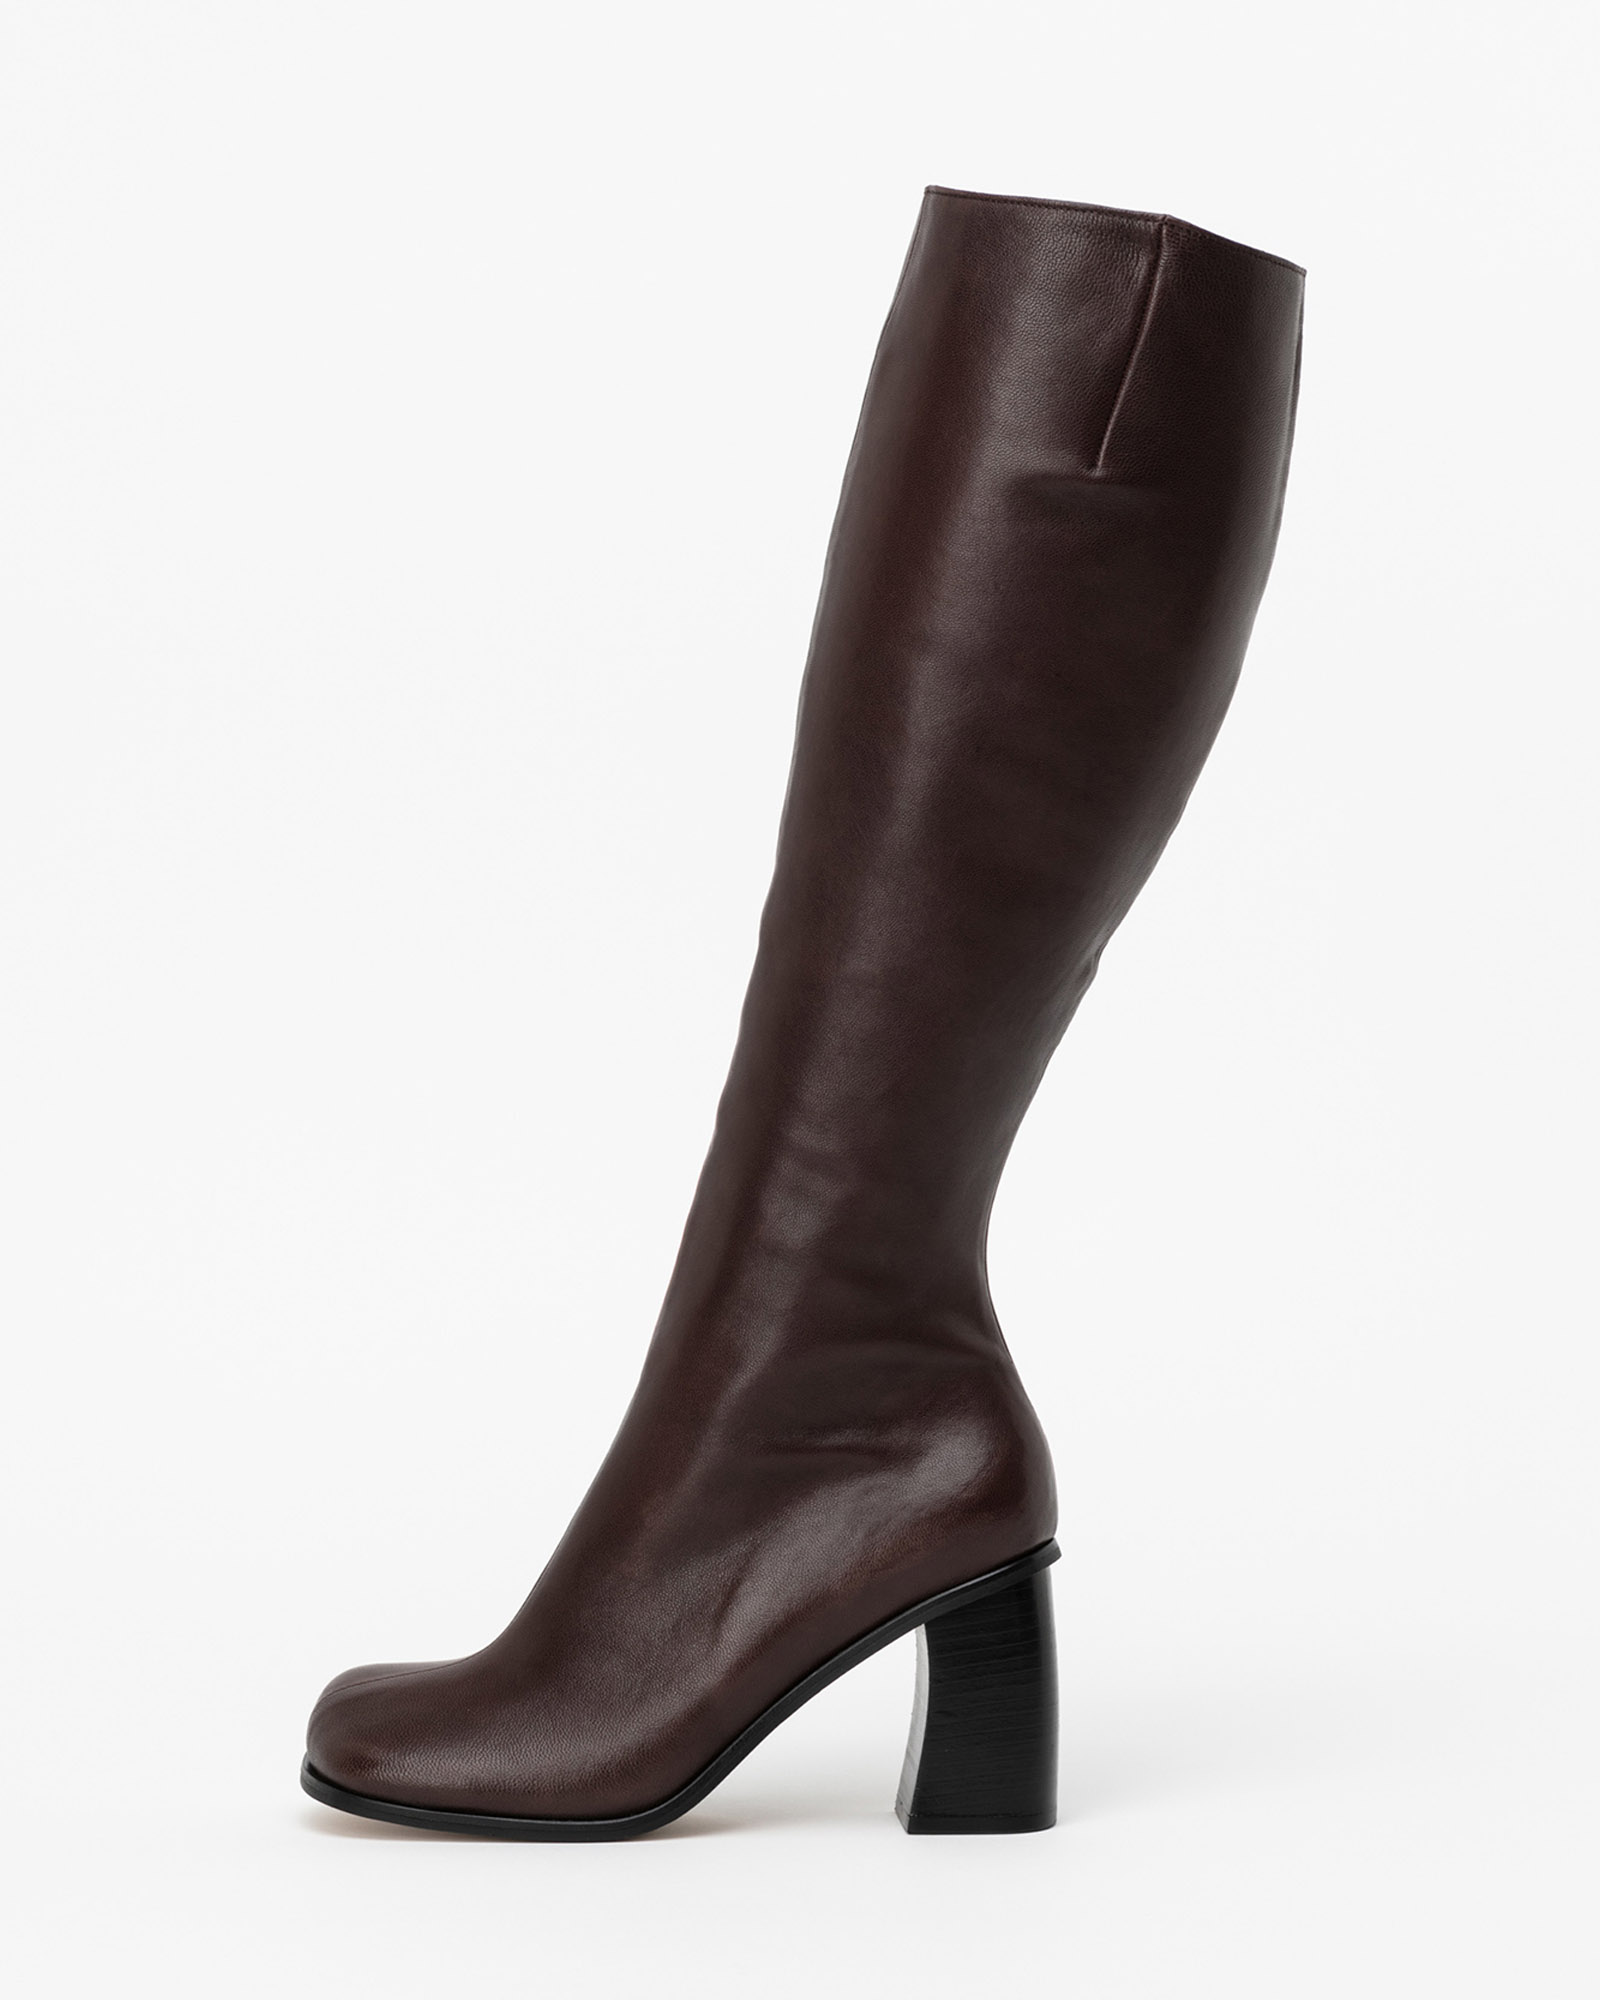 Revola Wrinkle Shaft Boots in Brown